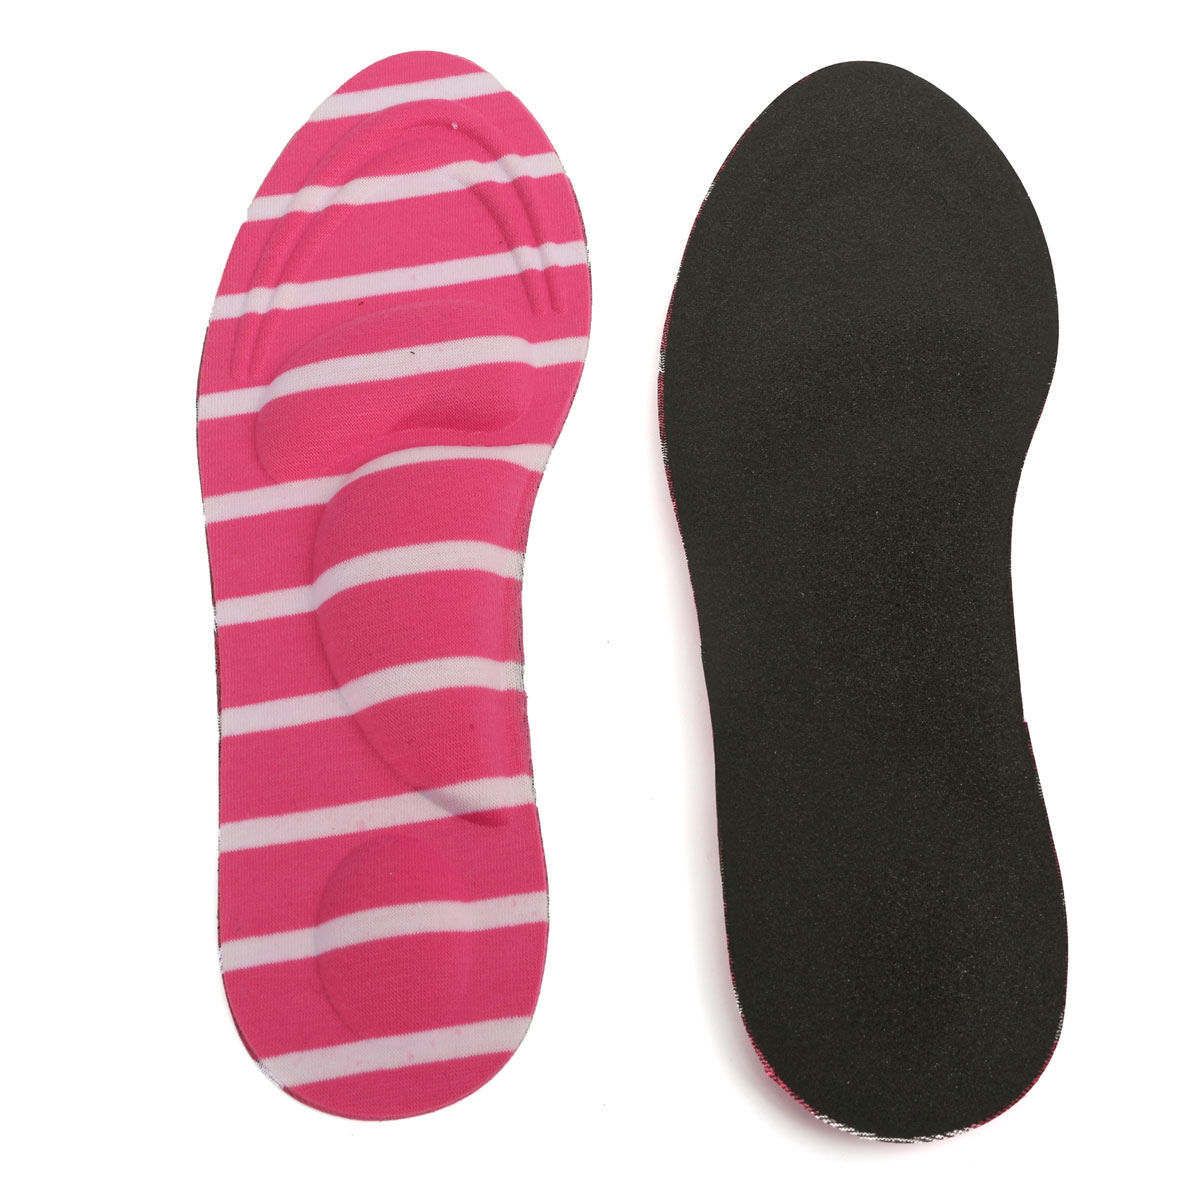 3D-Sponge-Arch-Support-Insoles-Damping-Insole-Pain-Relief-Pad-Cushion-1002490